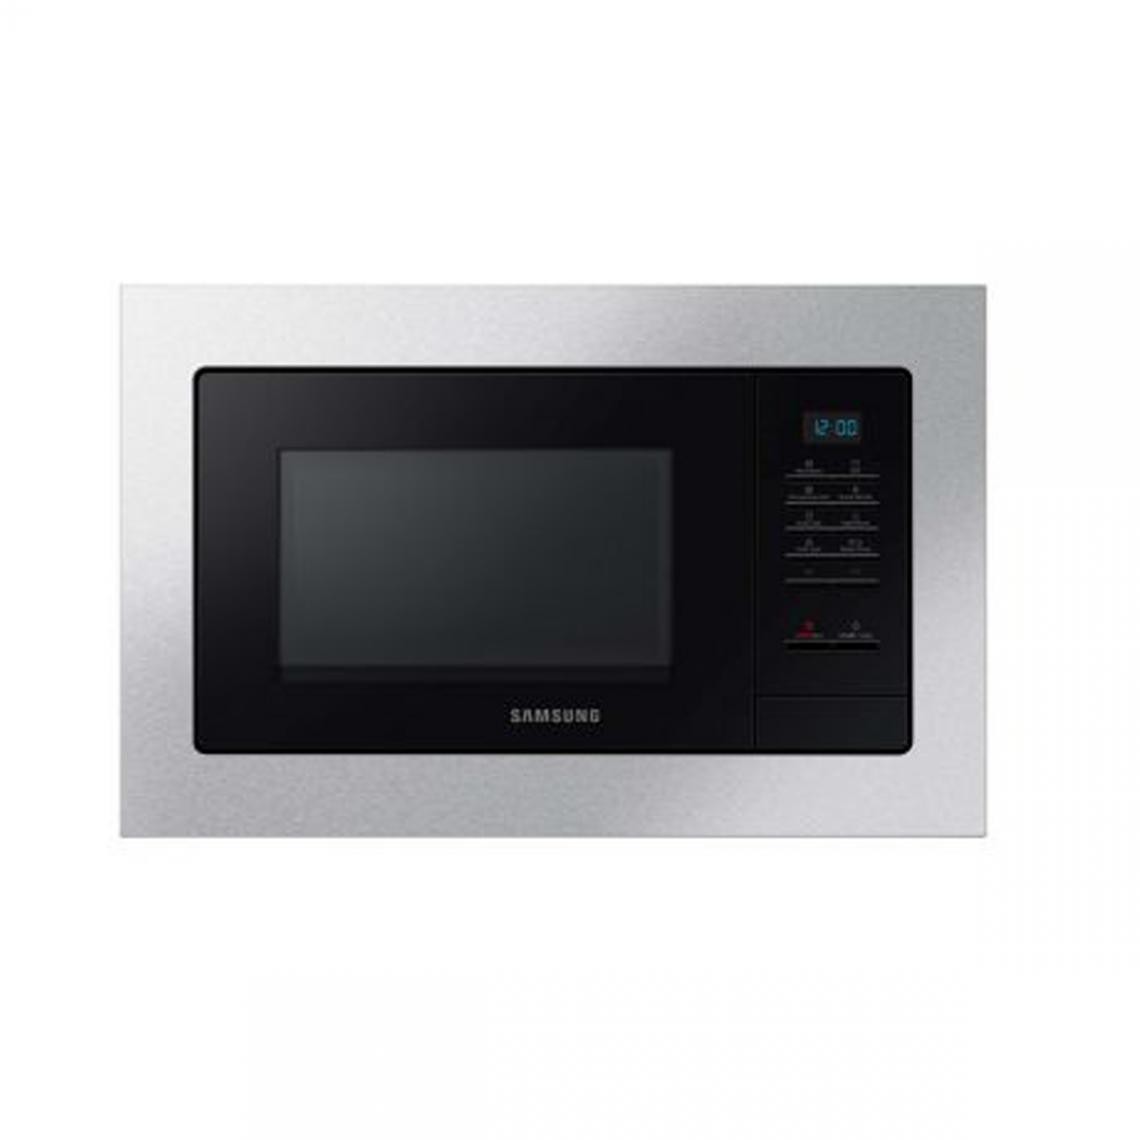 Samsung - Micro-onde Grill encastrable 850W - MG20A7013CT - Inox - Four micro-ondes